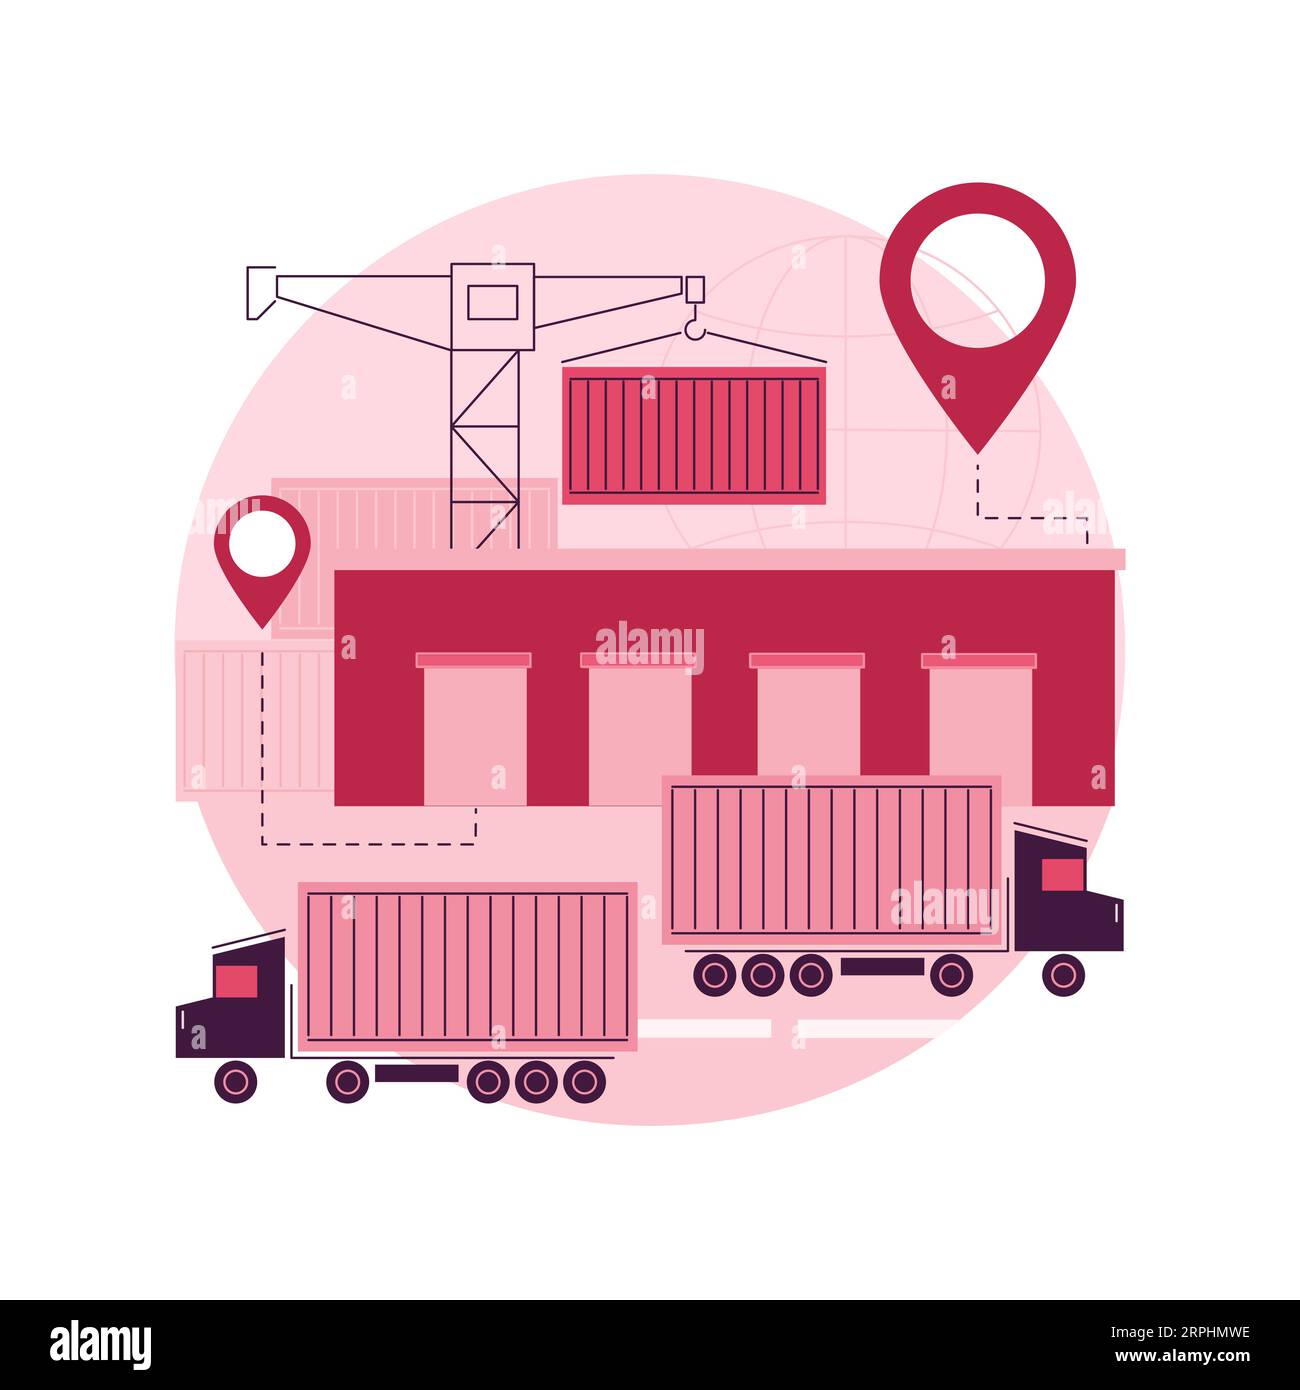 Logistics hub abstract concept vector illustration. Global logistics center, commercial warehouse, distribution hub, supply chain management, transportation cost optimization abstract metaphor. Stock Vector